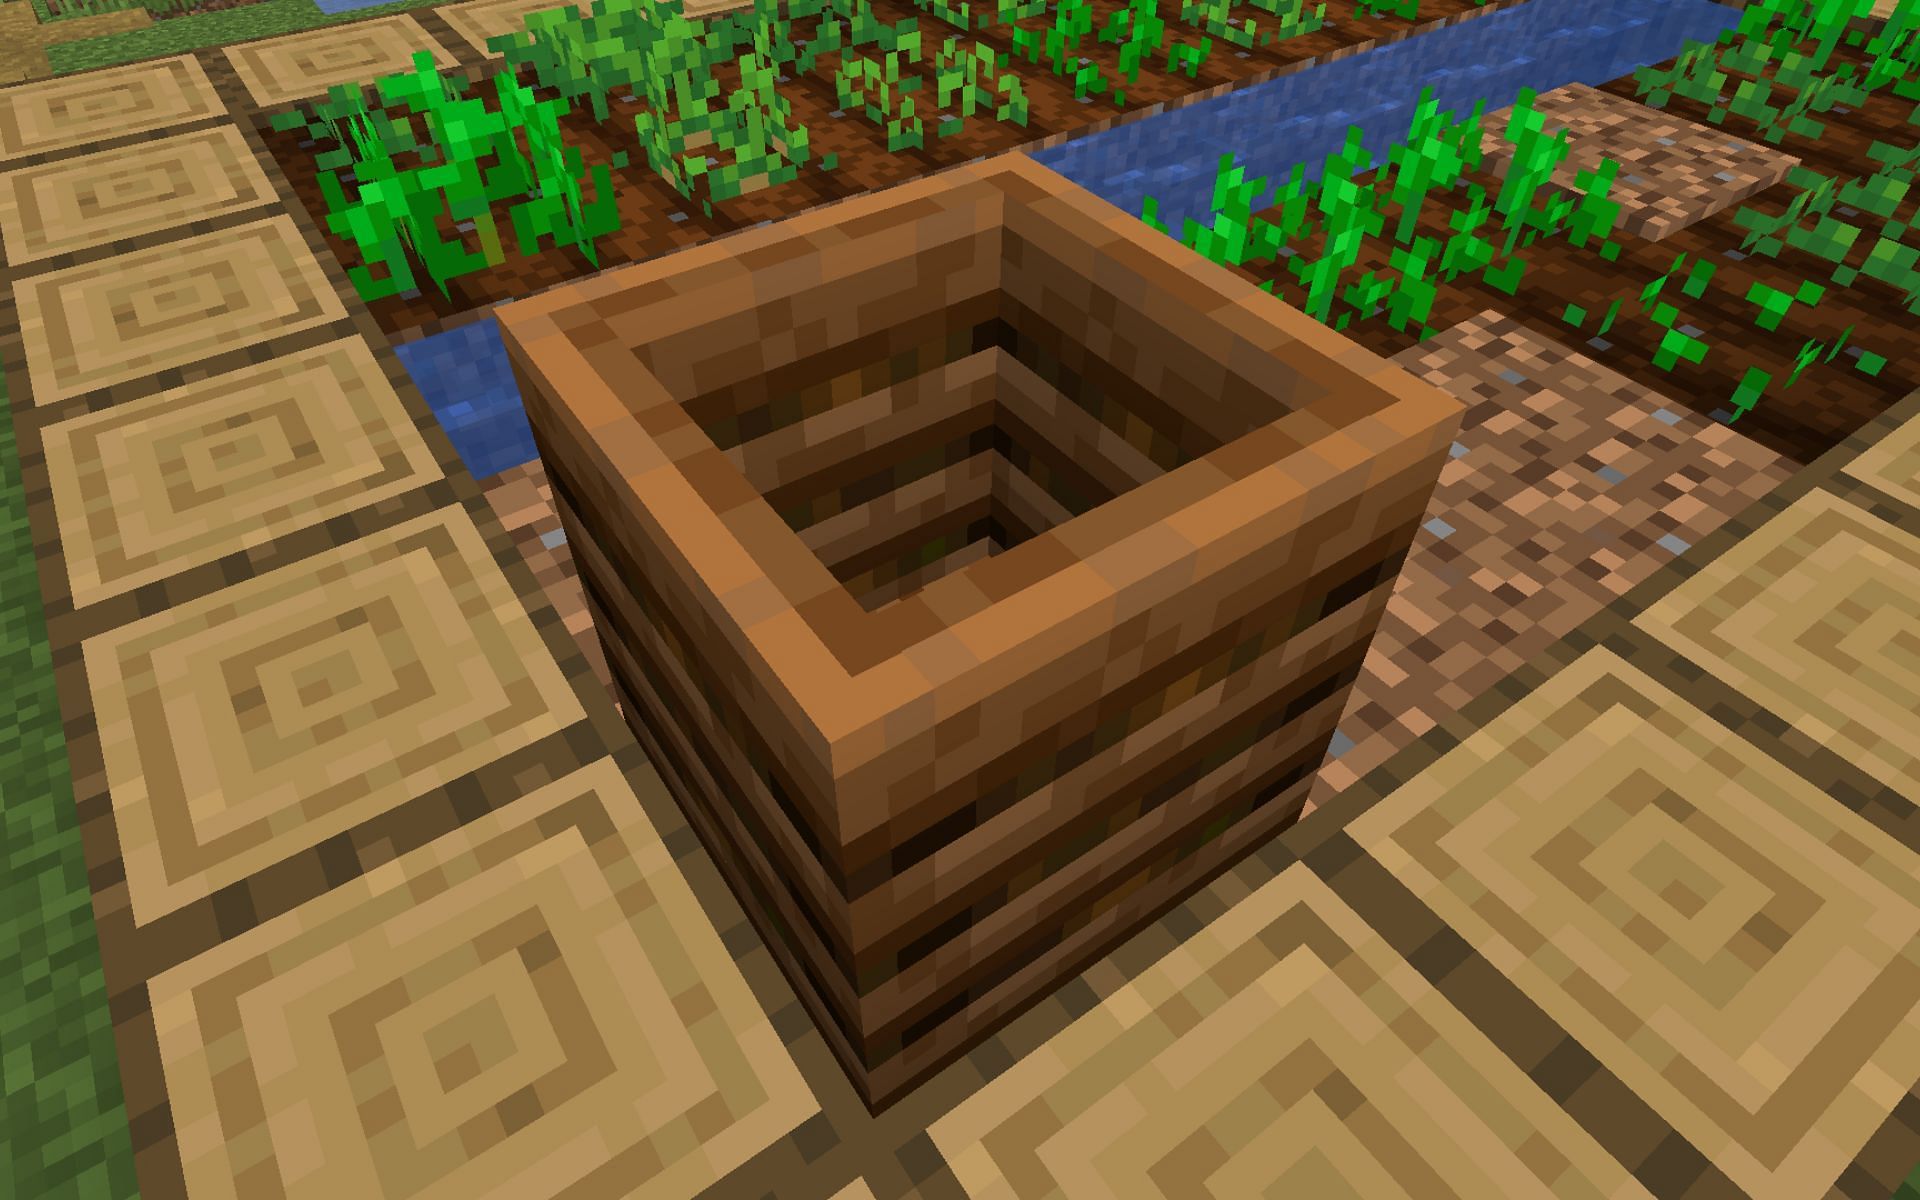 Composter block in a villager farm (Image via Minecraft 1.19 update)